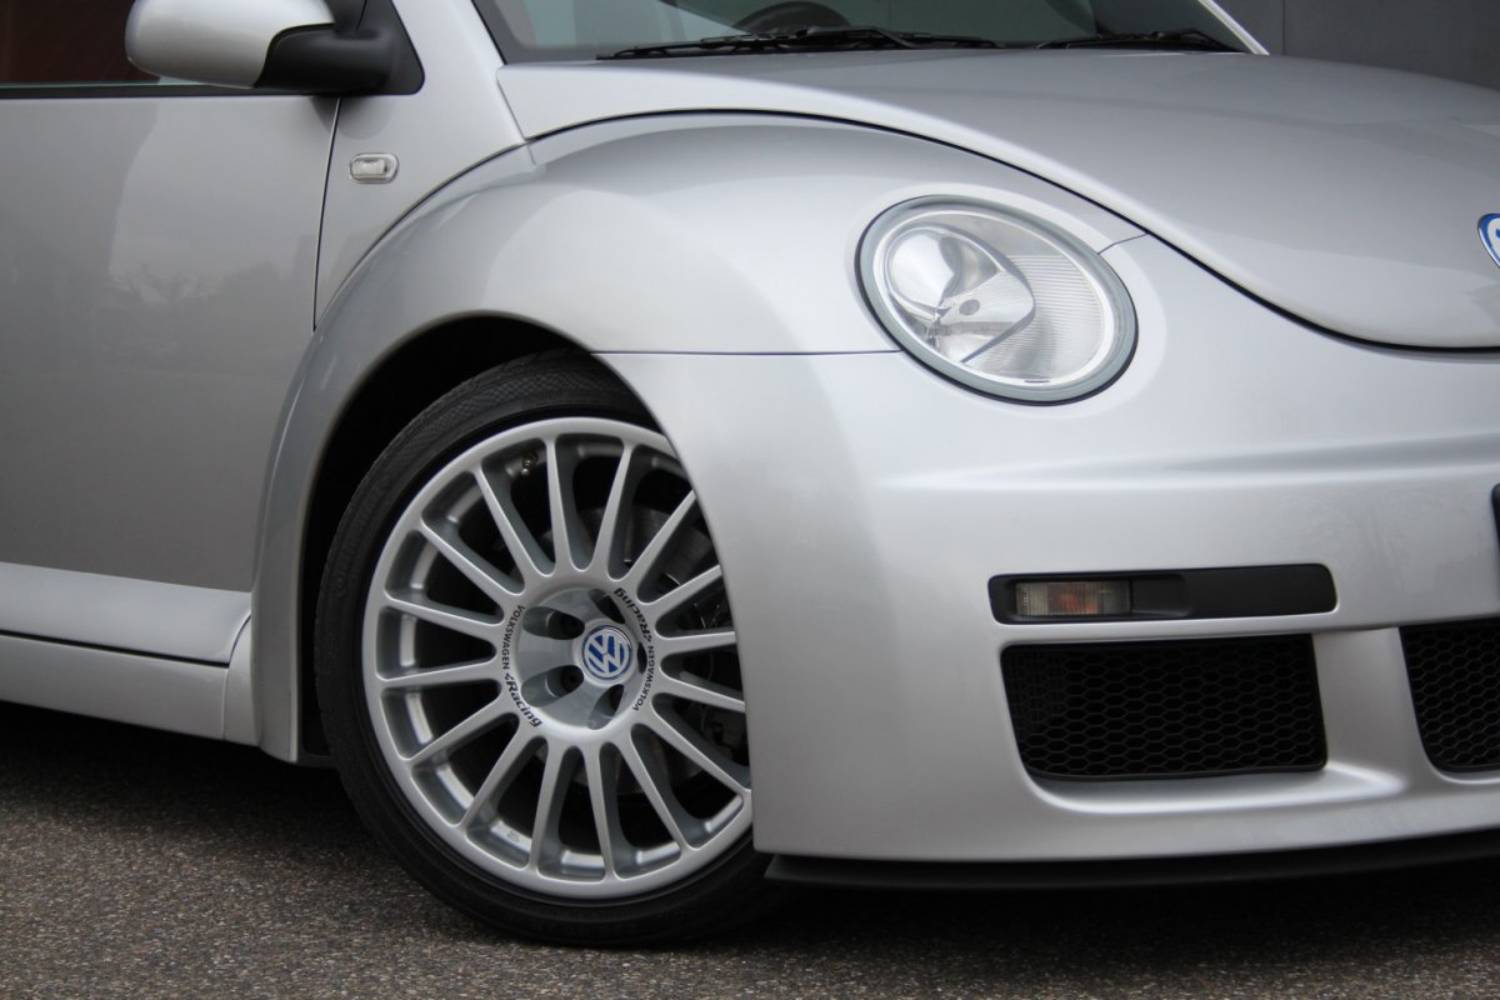 underestimate this 2003 vw beetle rsi at your own peril carscoops 2003 vw beetle rsi at your own peril